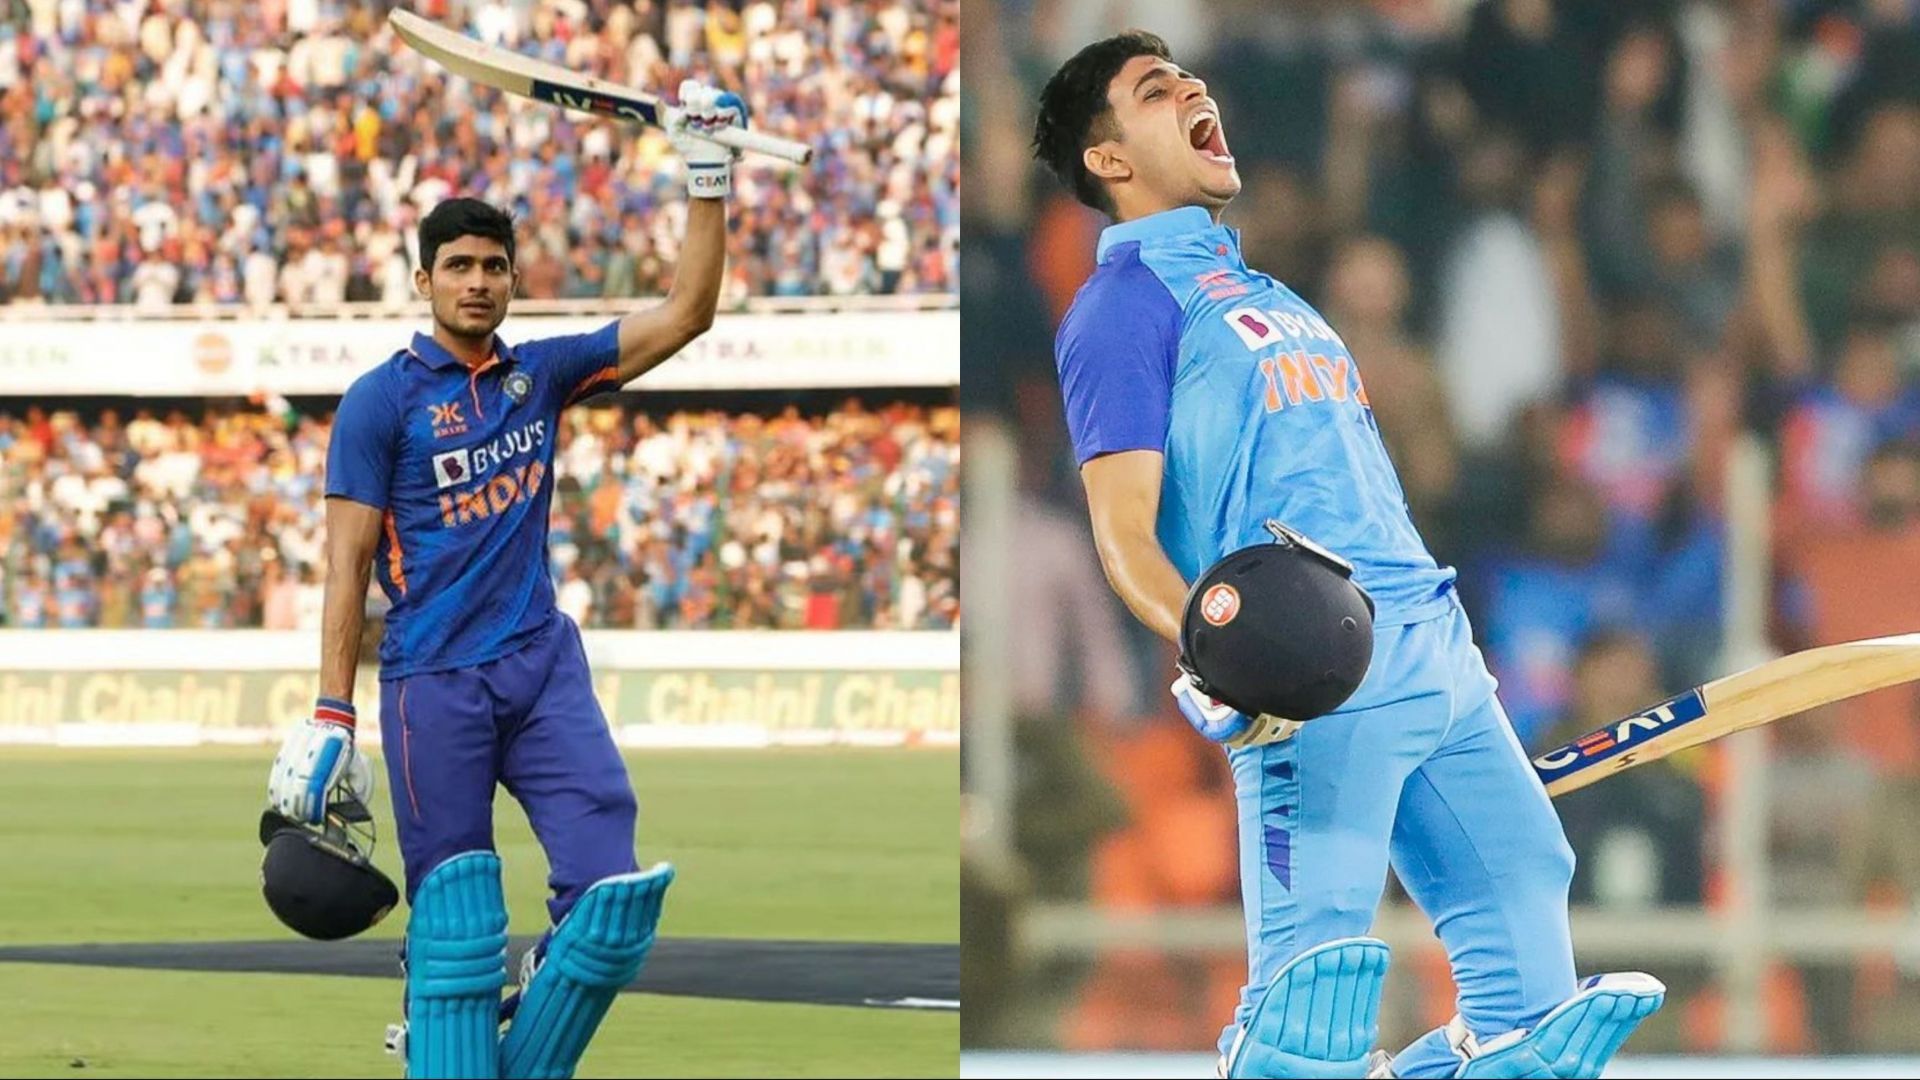 Shubman Gill has joined an elite club (Image: BCCI)